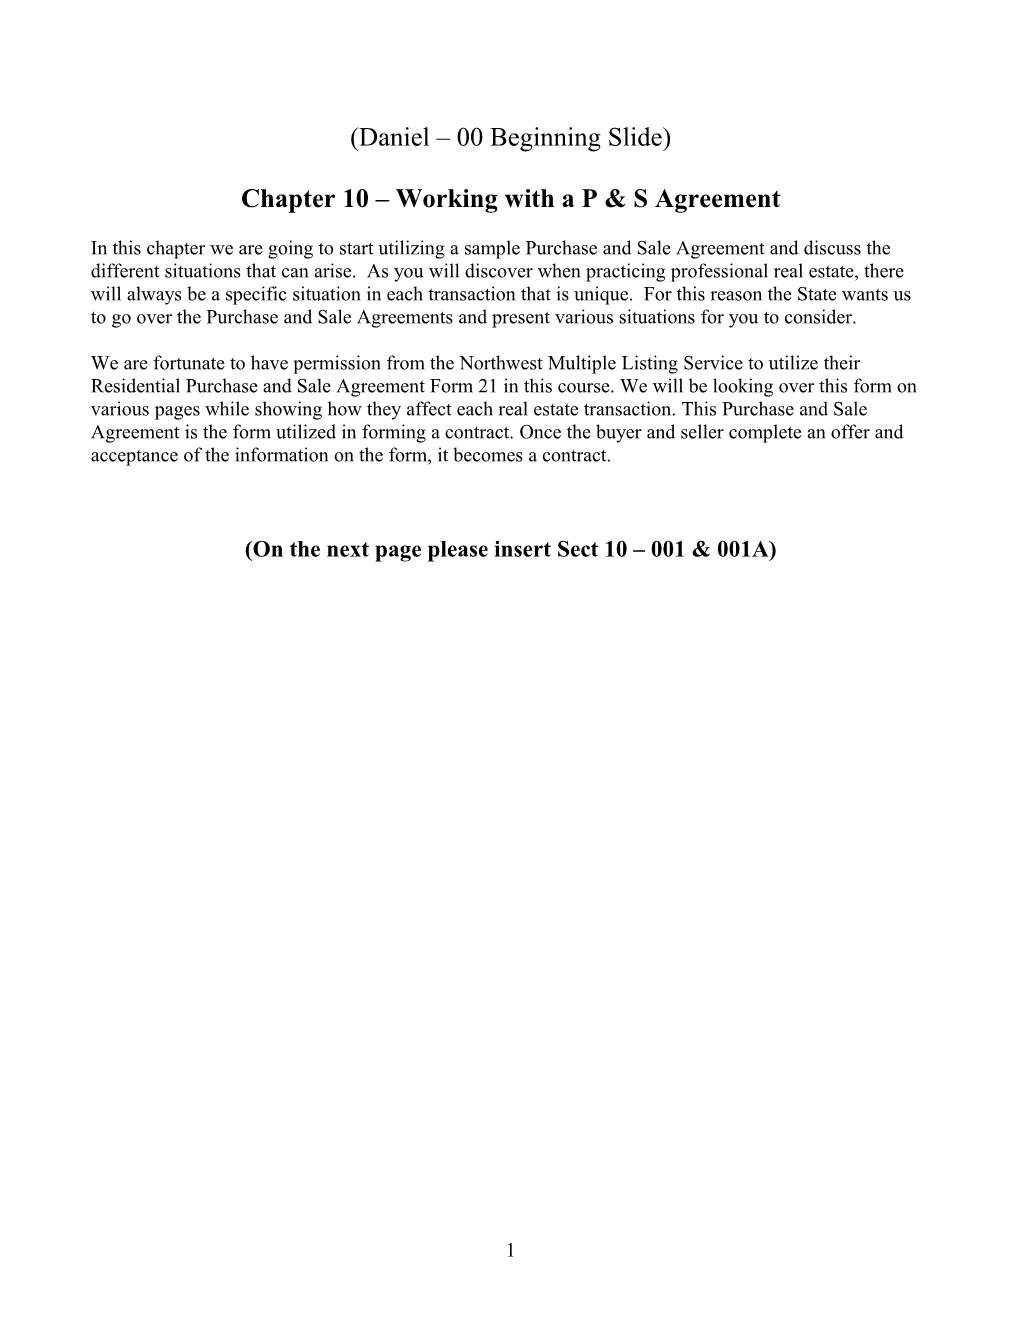 Chapter 10 Working with a P & S Agreement